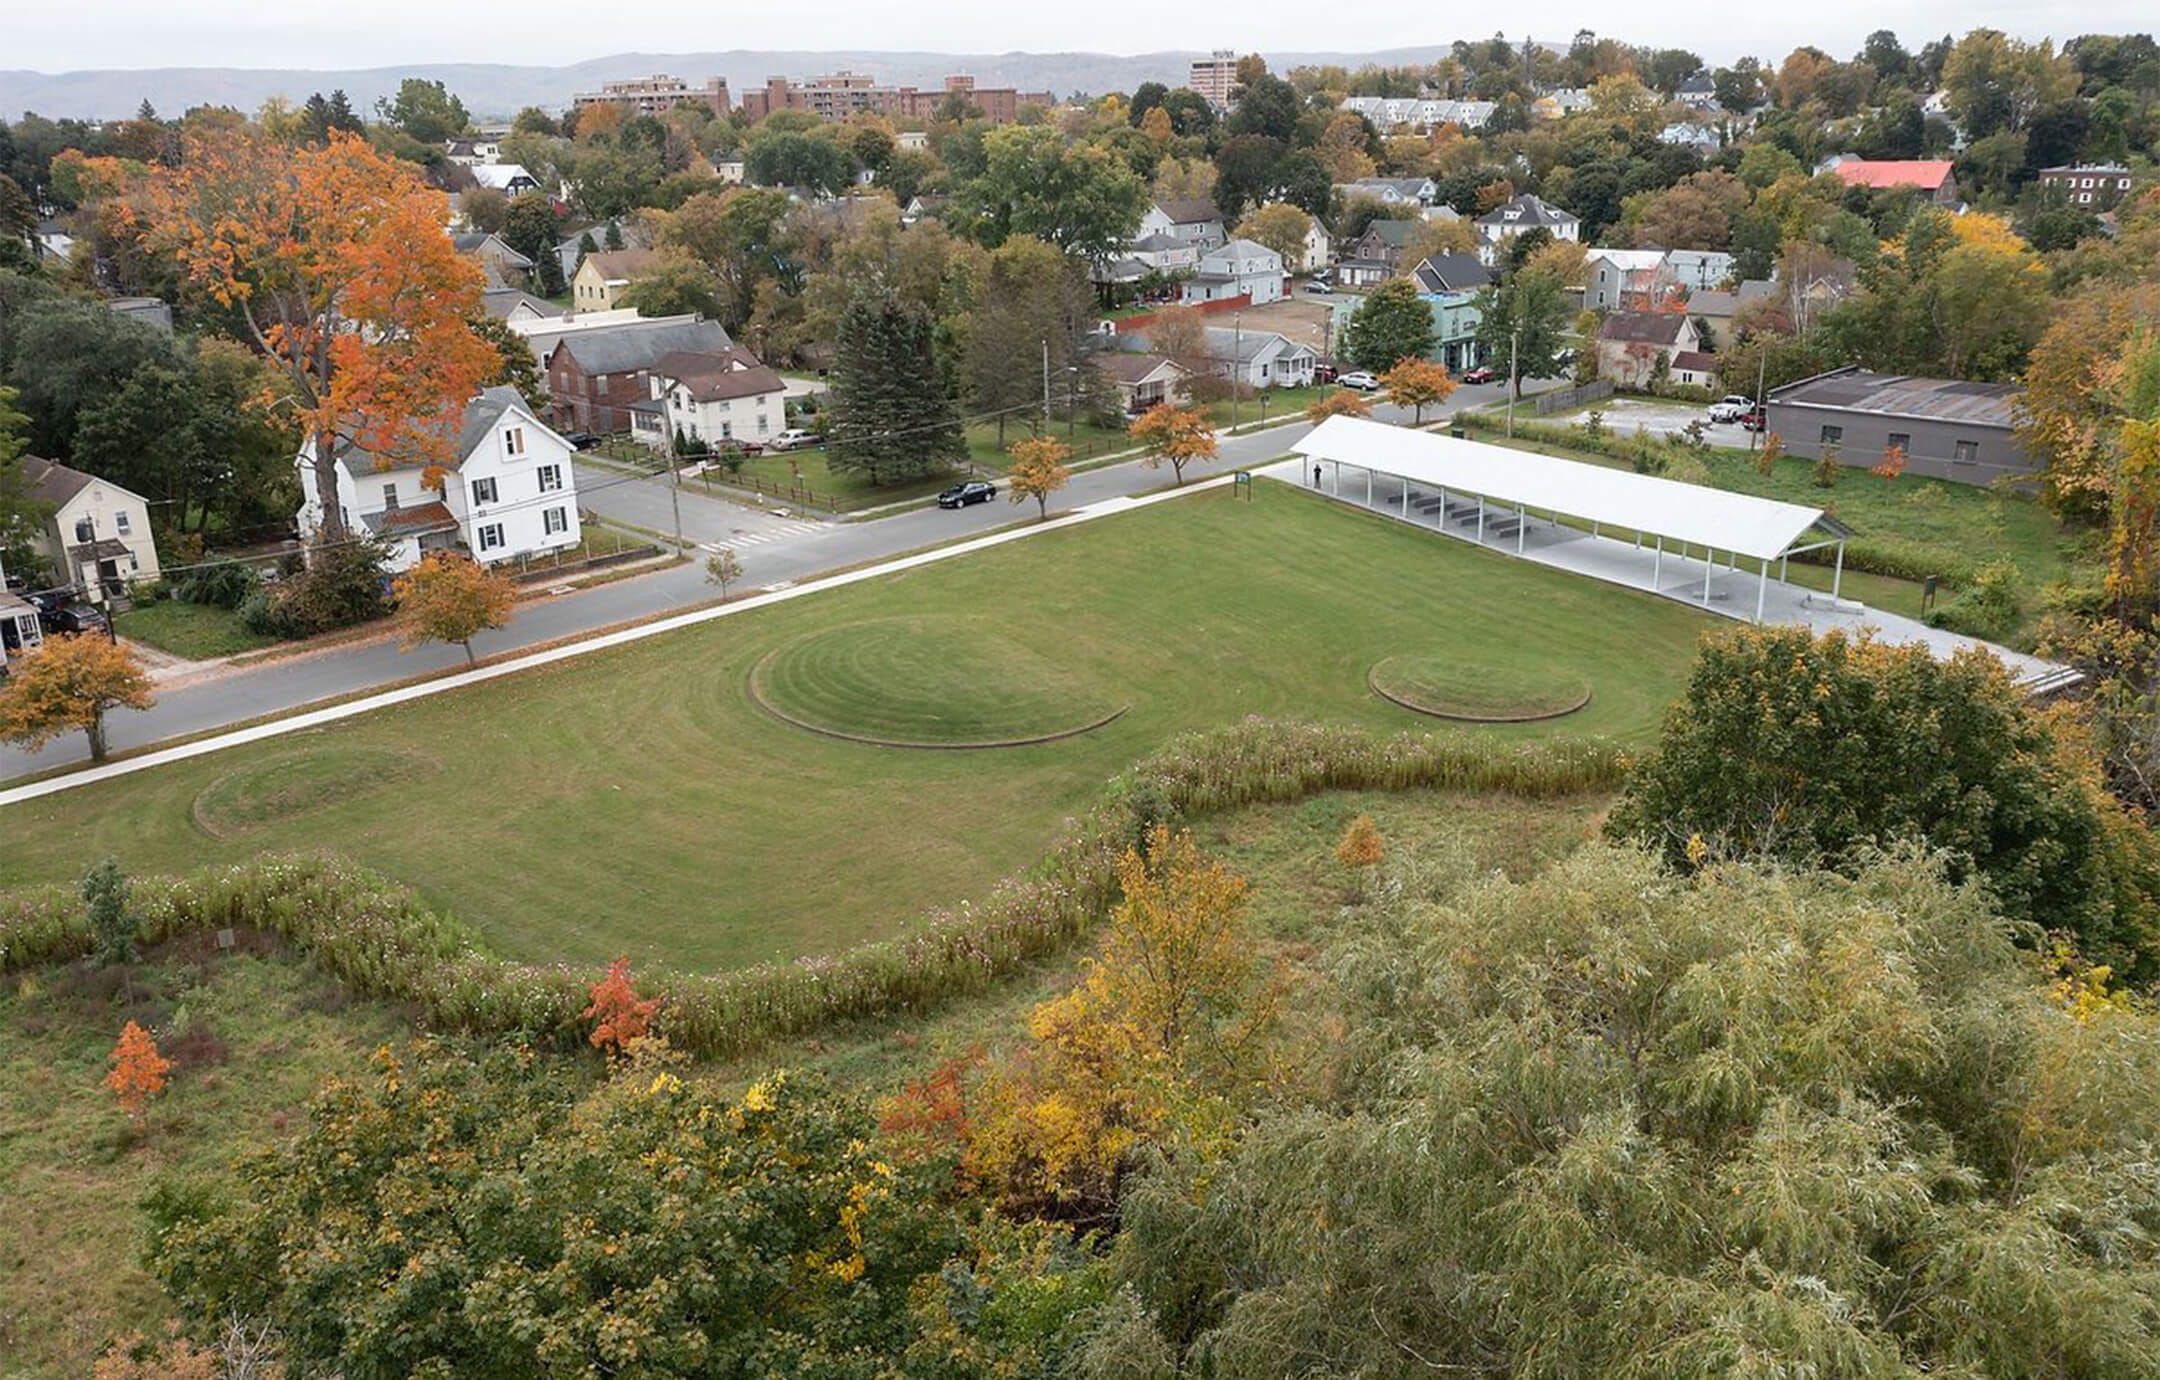 A drone-eye view of a park with several circular mounds in the grass and a white-roofed open pavilion along one edge